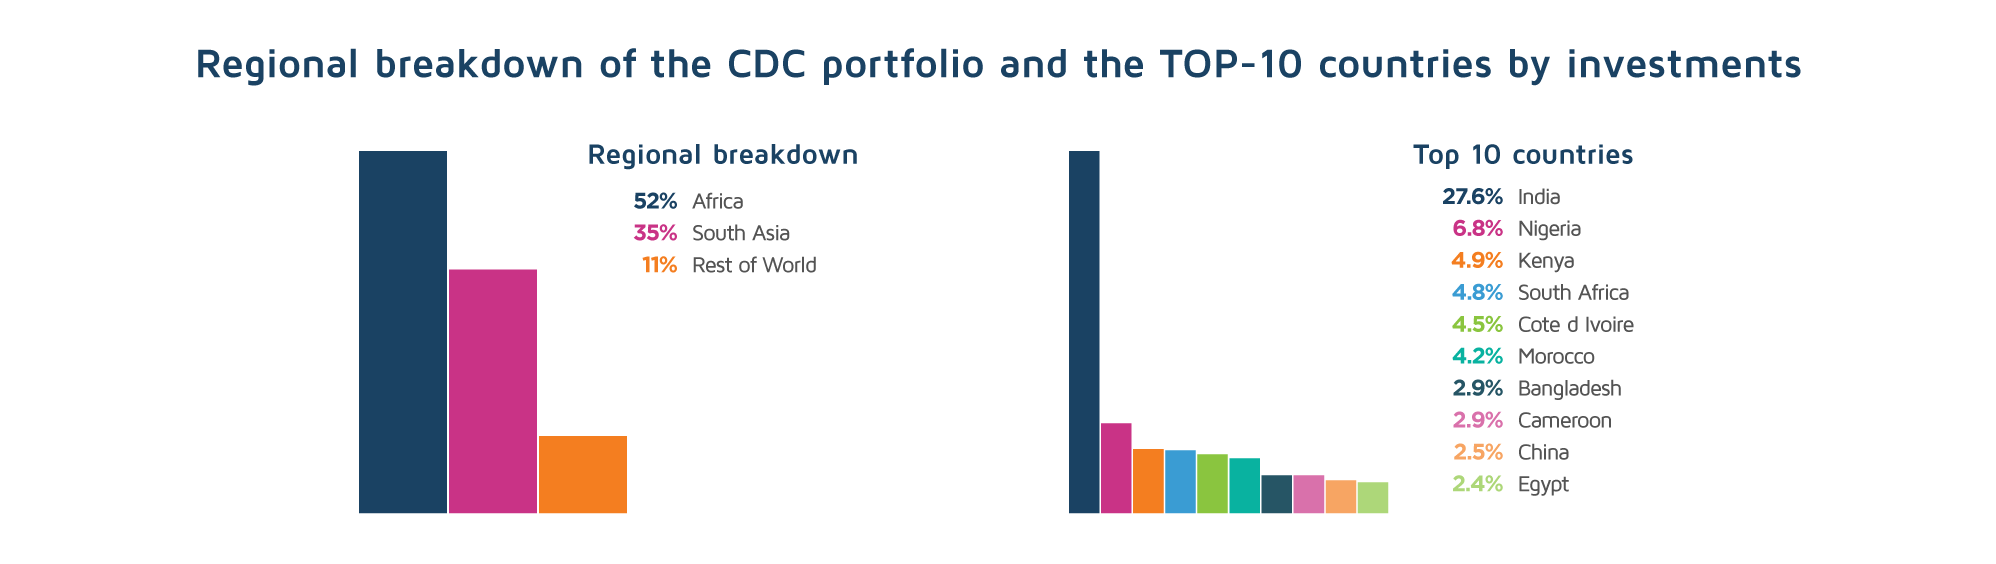 Regional breakdown of the CDC portfolio and the TOP-10 countries by investments